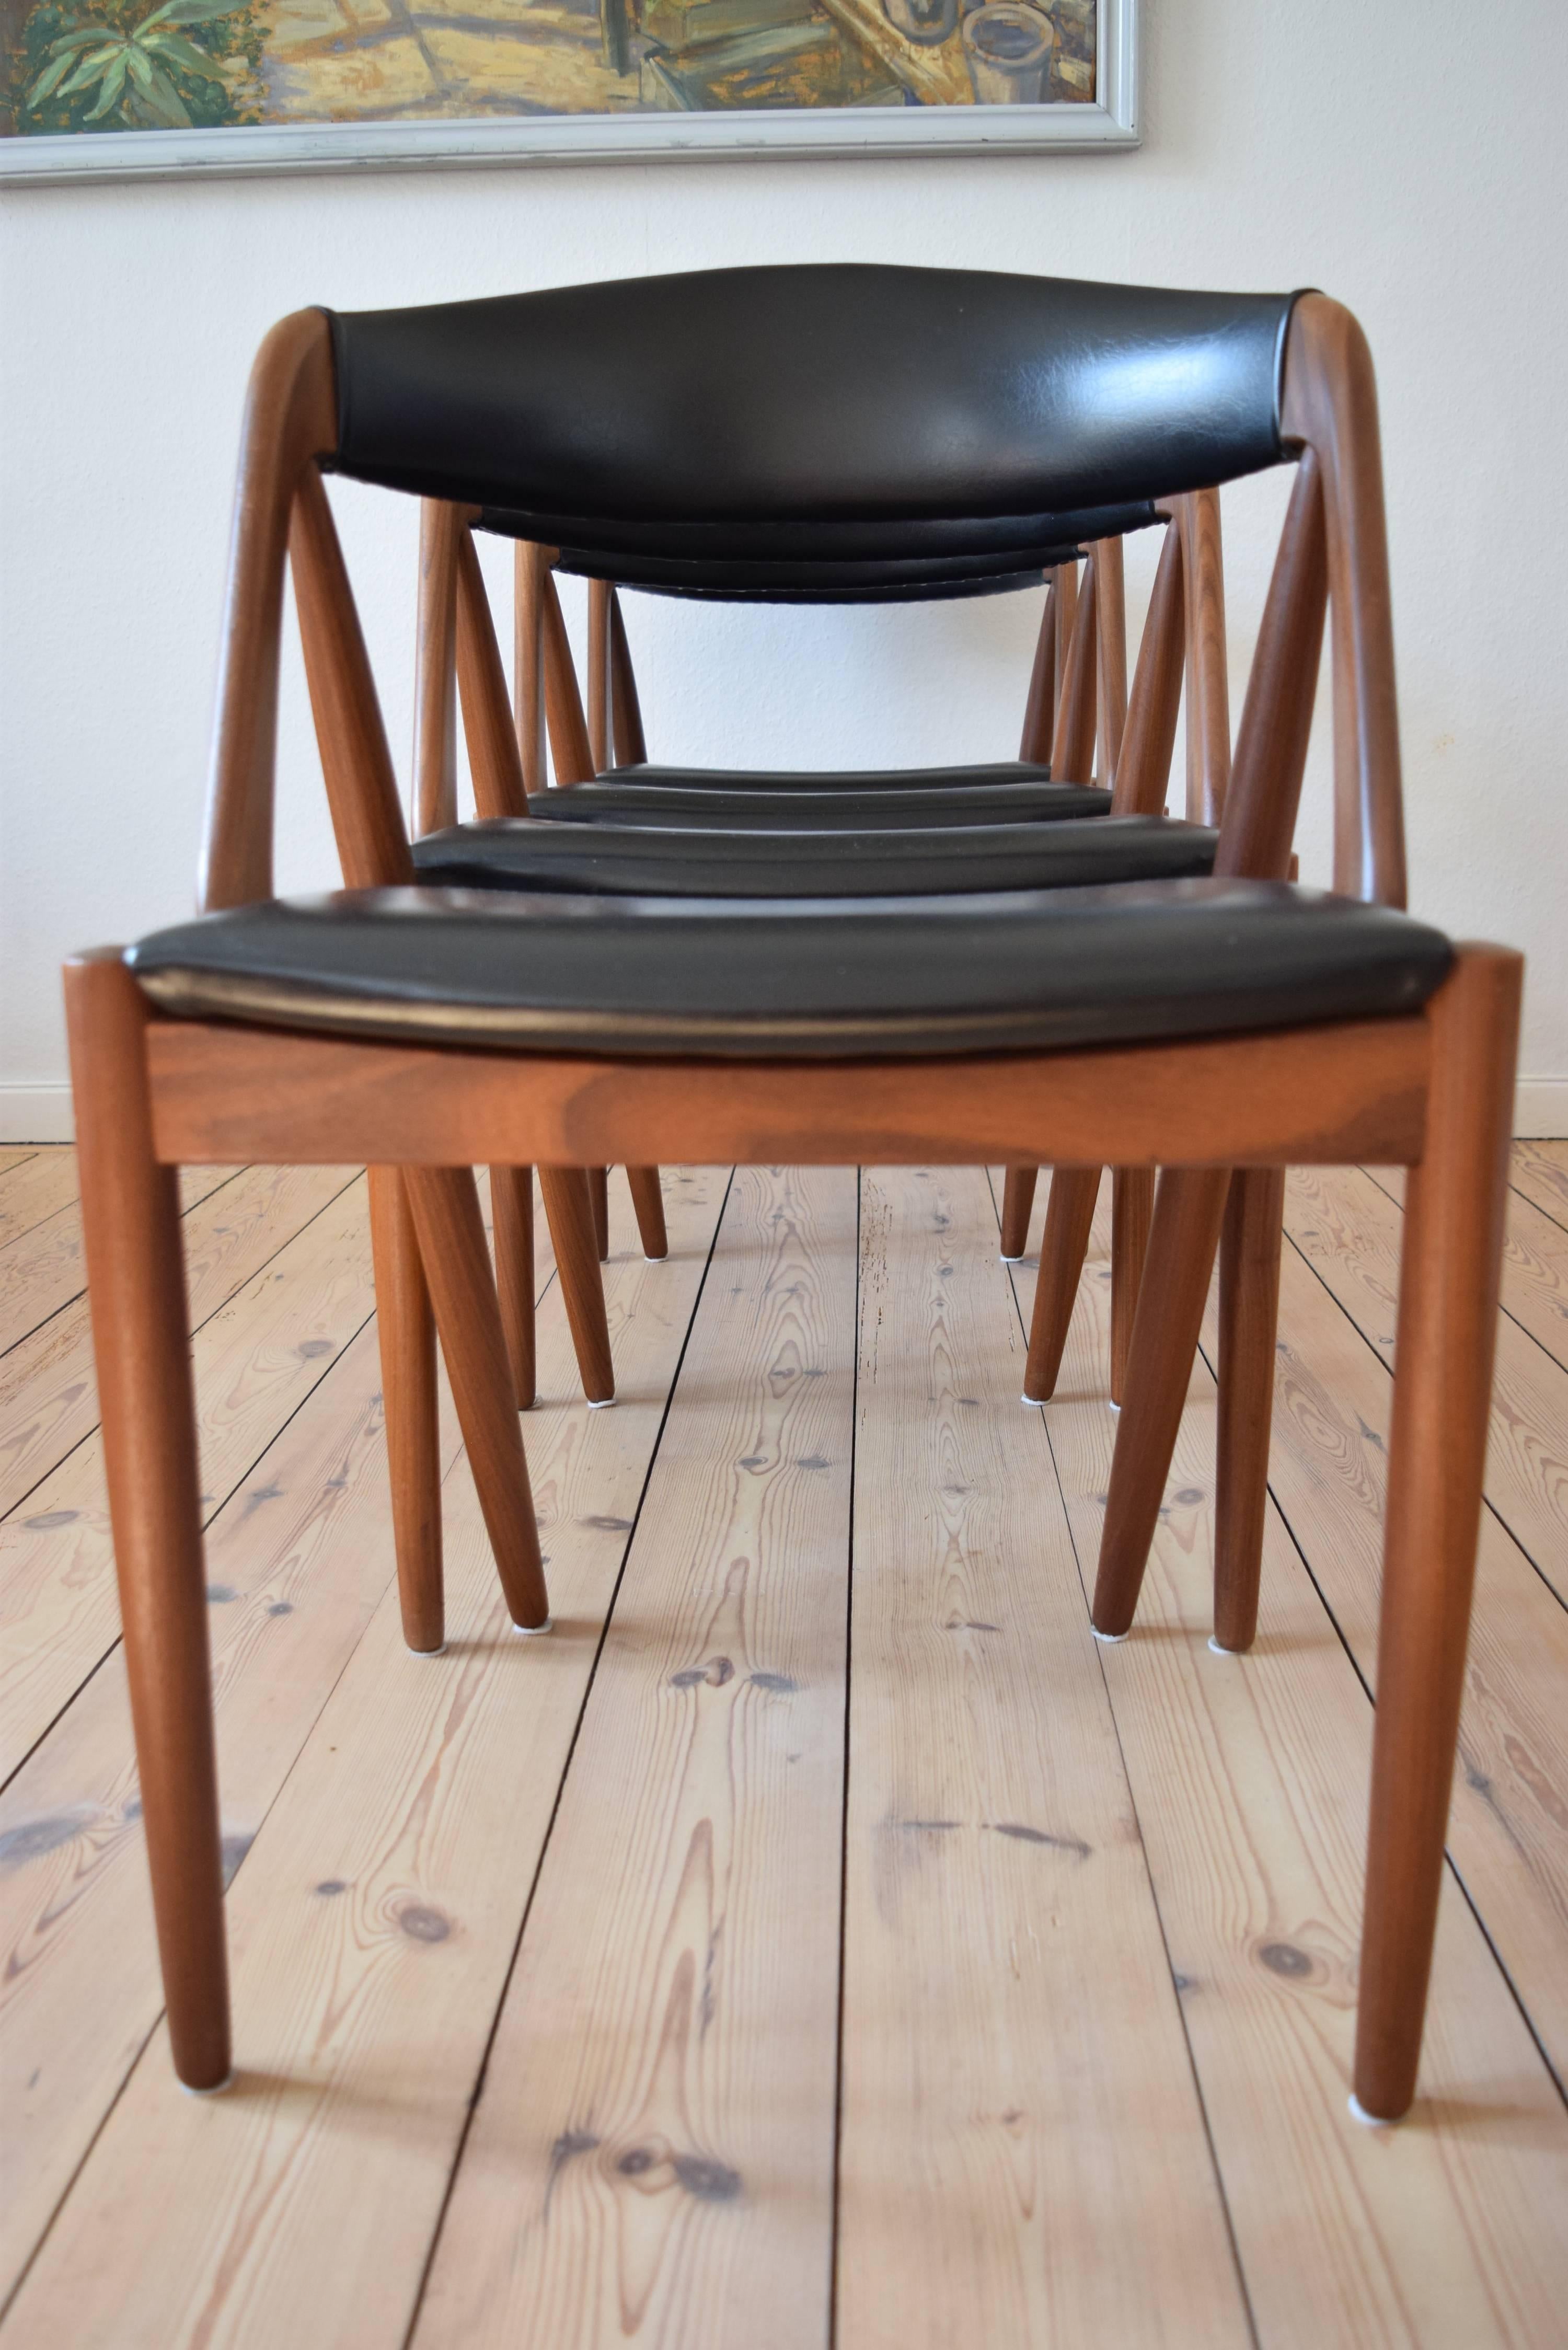 Set of four dining #31 chairs by Kai Kristiansen for Schou Møbelfabrik, Denmark. The frame is made of teak and the seats and backrests are covered in the original black skai. This model features a deep curved backrest for extra comfort. We can these